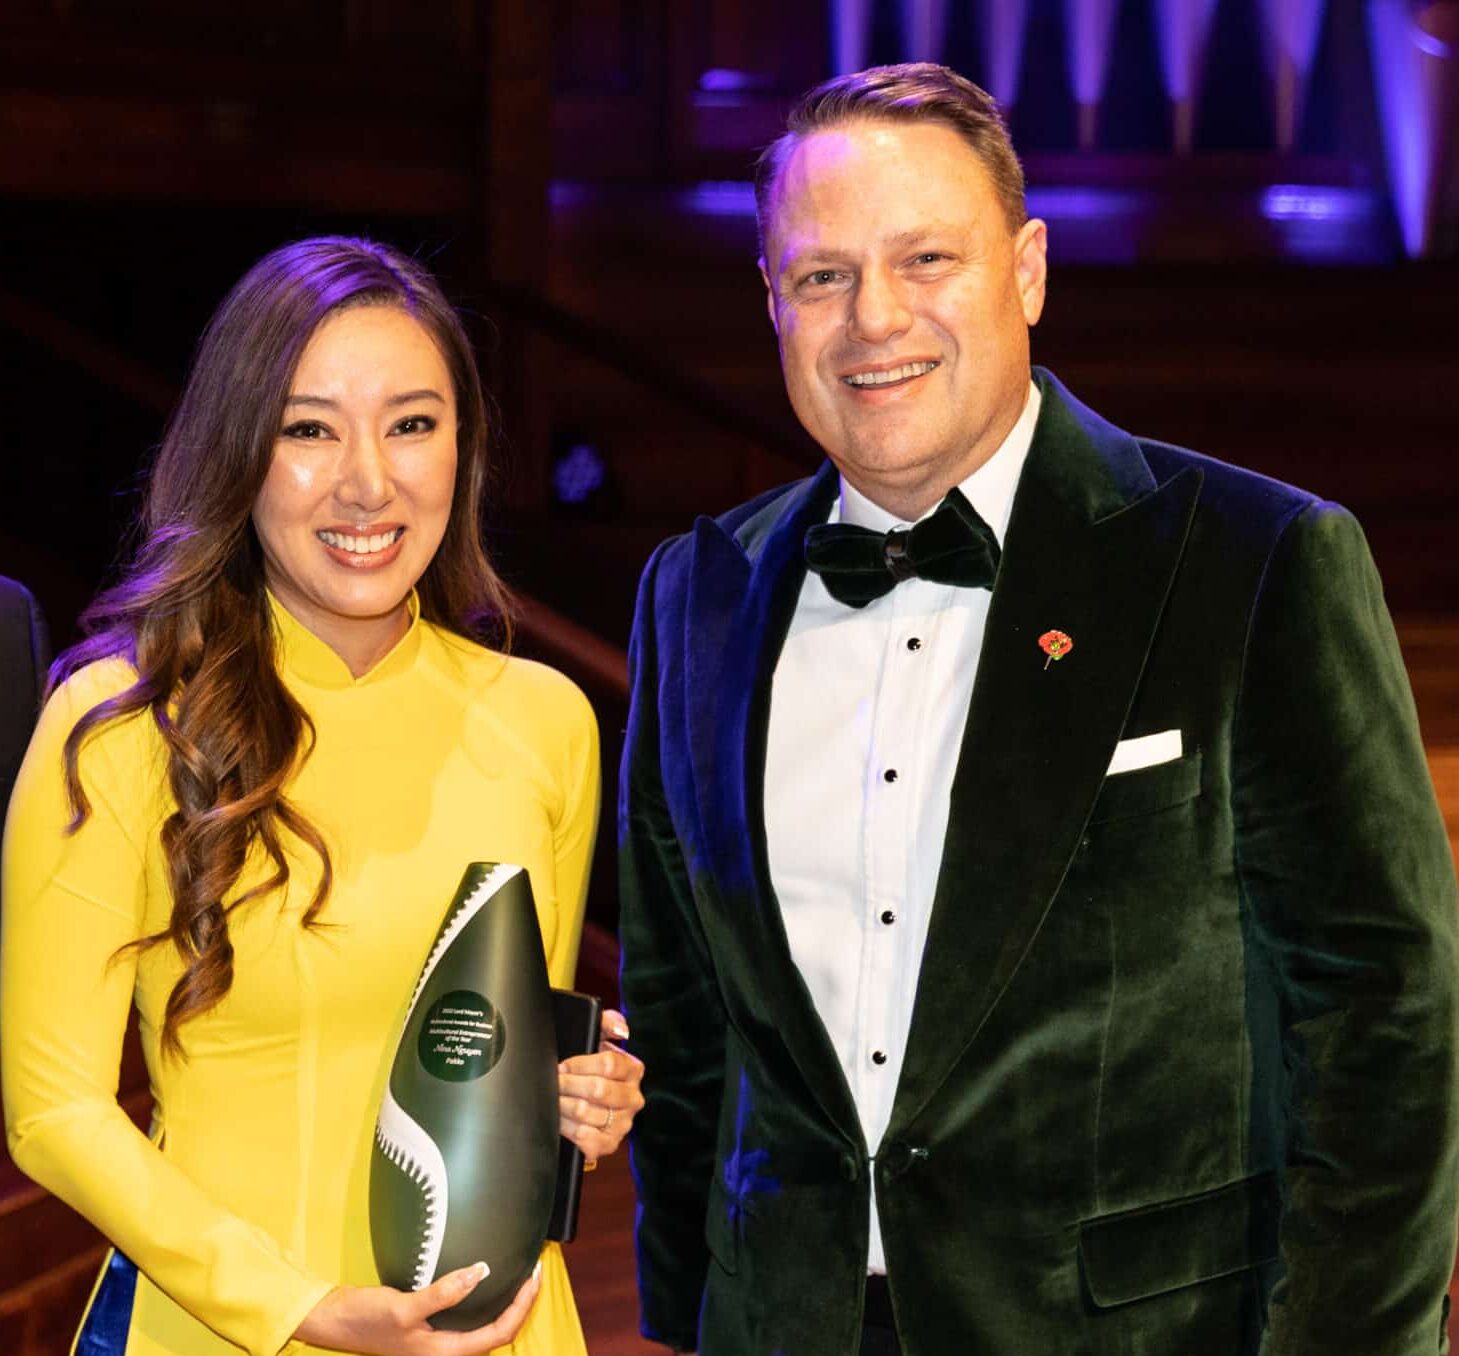 Lord Mayor’s Multicultural Business Awards